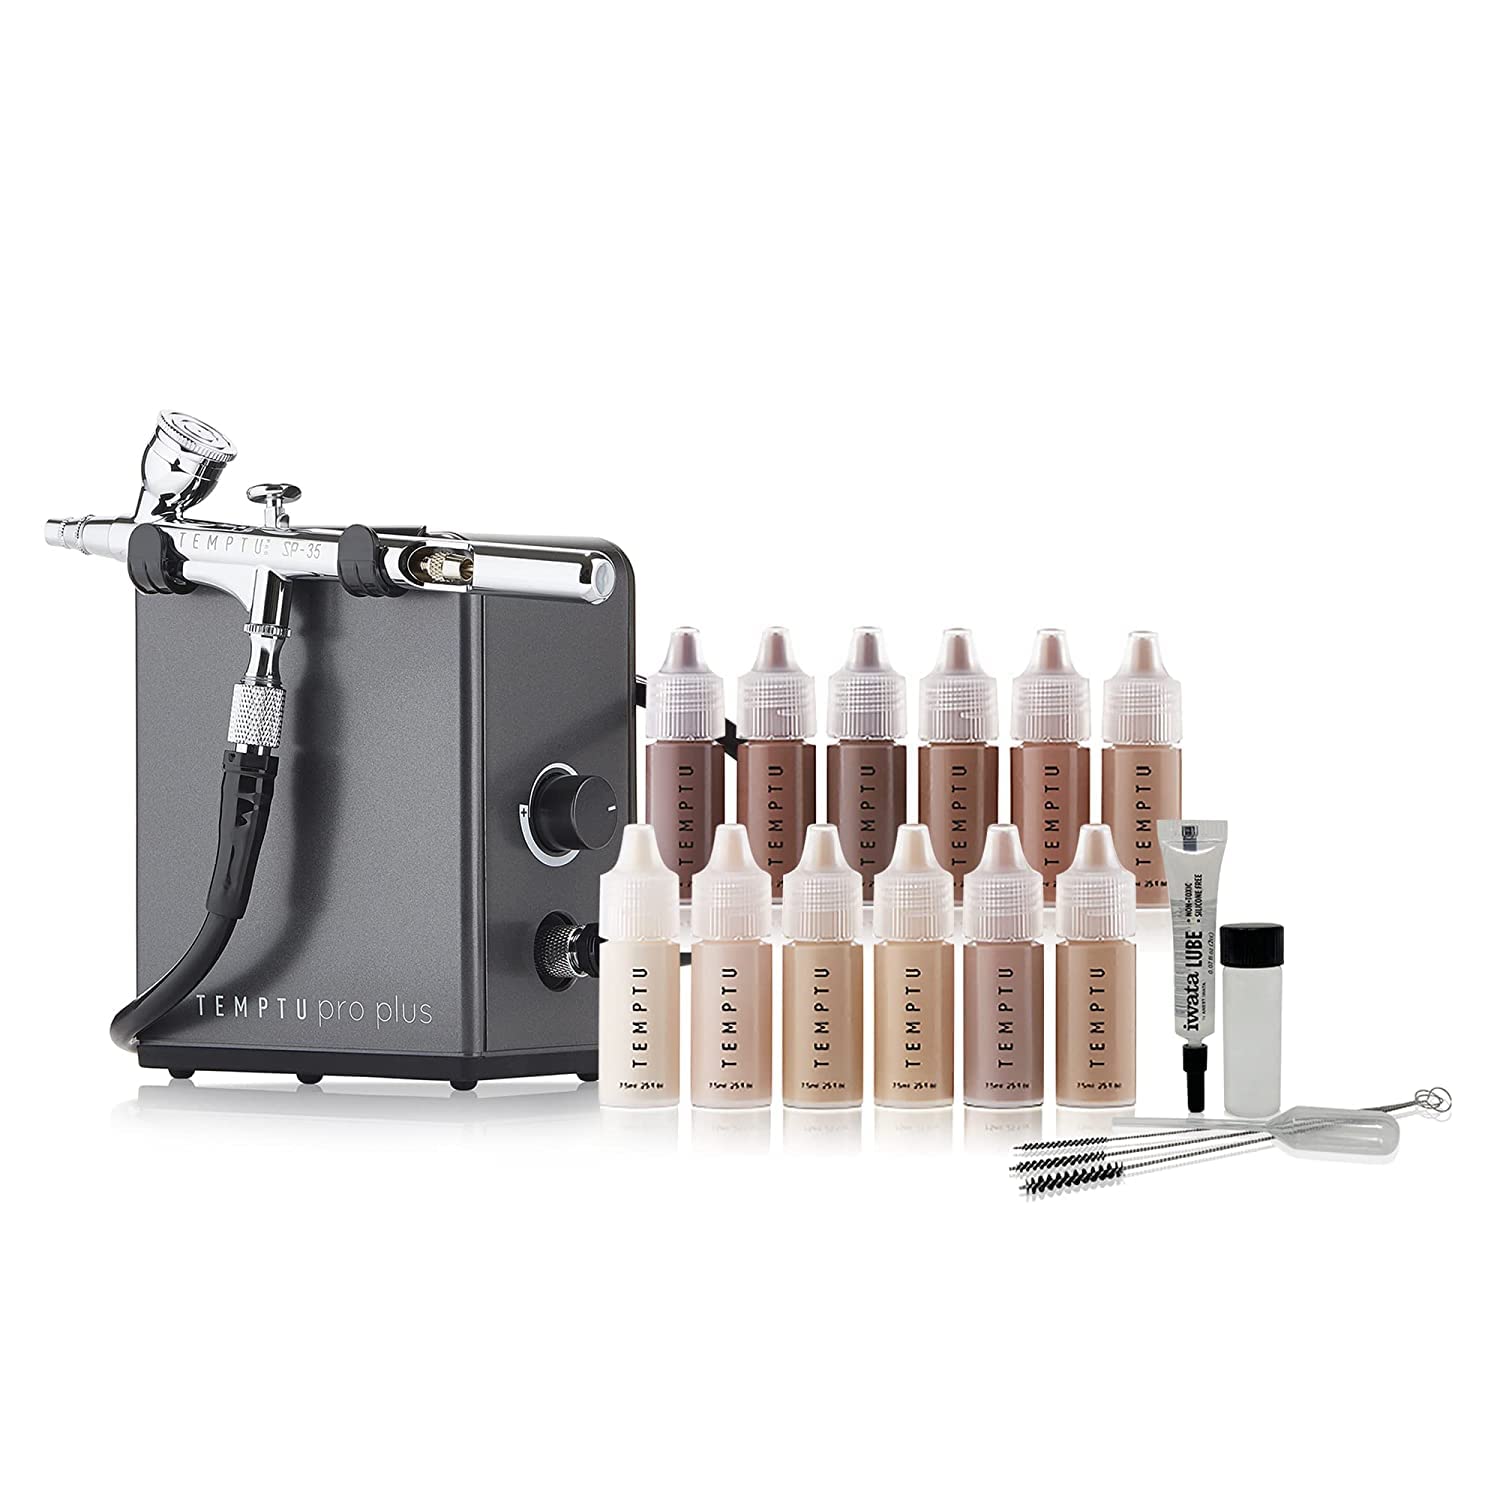 TEMPTU Airbrush Makeup System Pro Plus Kit: Airbrush Makeup Set for Professionals and Makeup Artists: Includes S/B Silicone-Based Foundation Starter Set & Cleaning Kit, Lightweight, Travel-Friendly